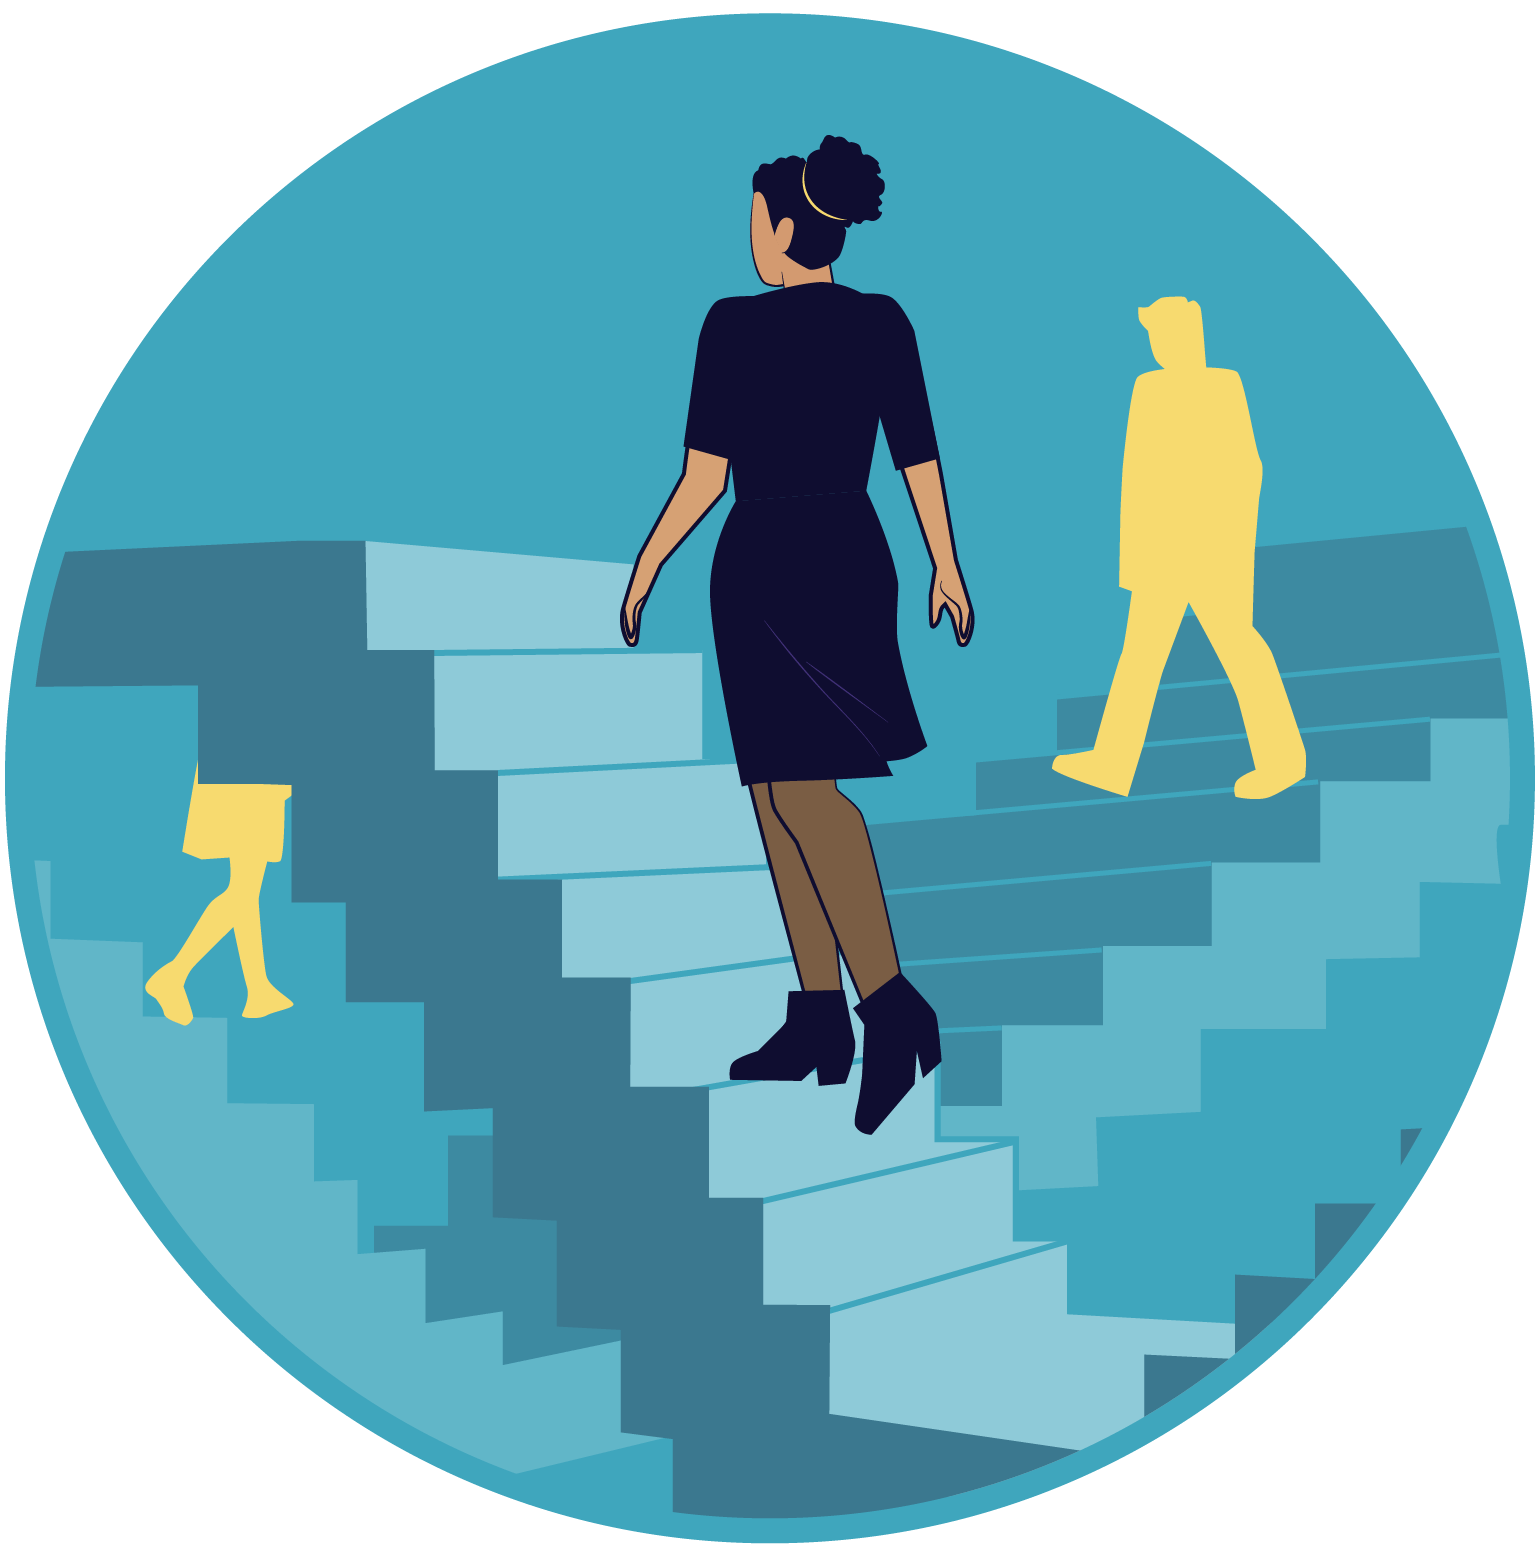 A woman walkng on stairs that can take her to many places in her career.